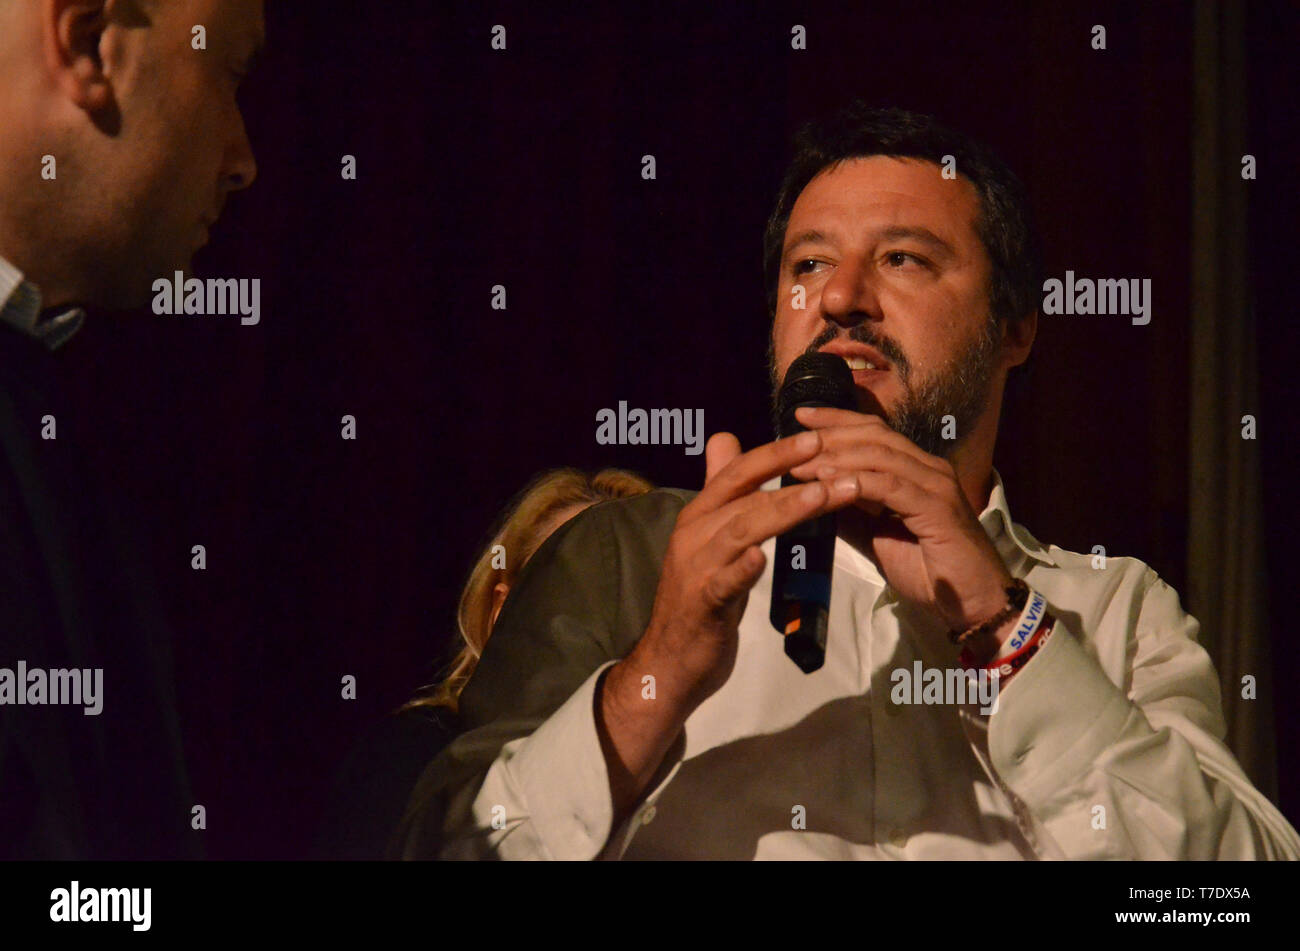 Aversa, Matteo Salvini in Aversa for the electoral campaign of the center-right for the city administrative offices. With him the candidate for Mayor Gianluca Golia. 06/05/2019, Aversa, Italy Stock Photo